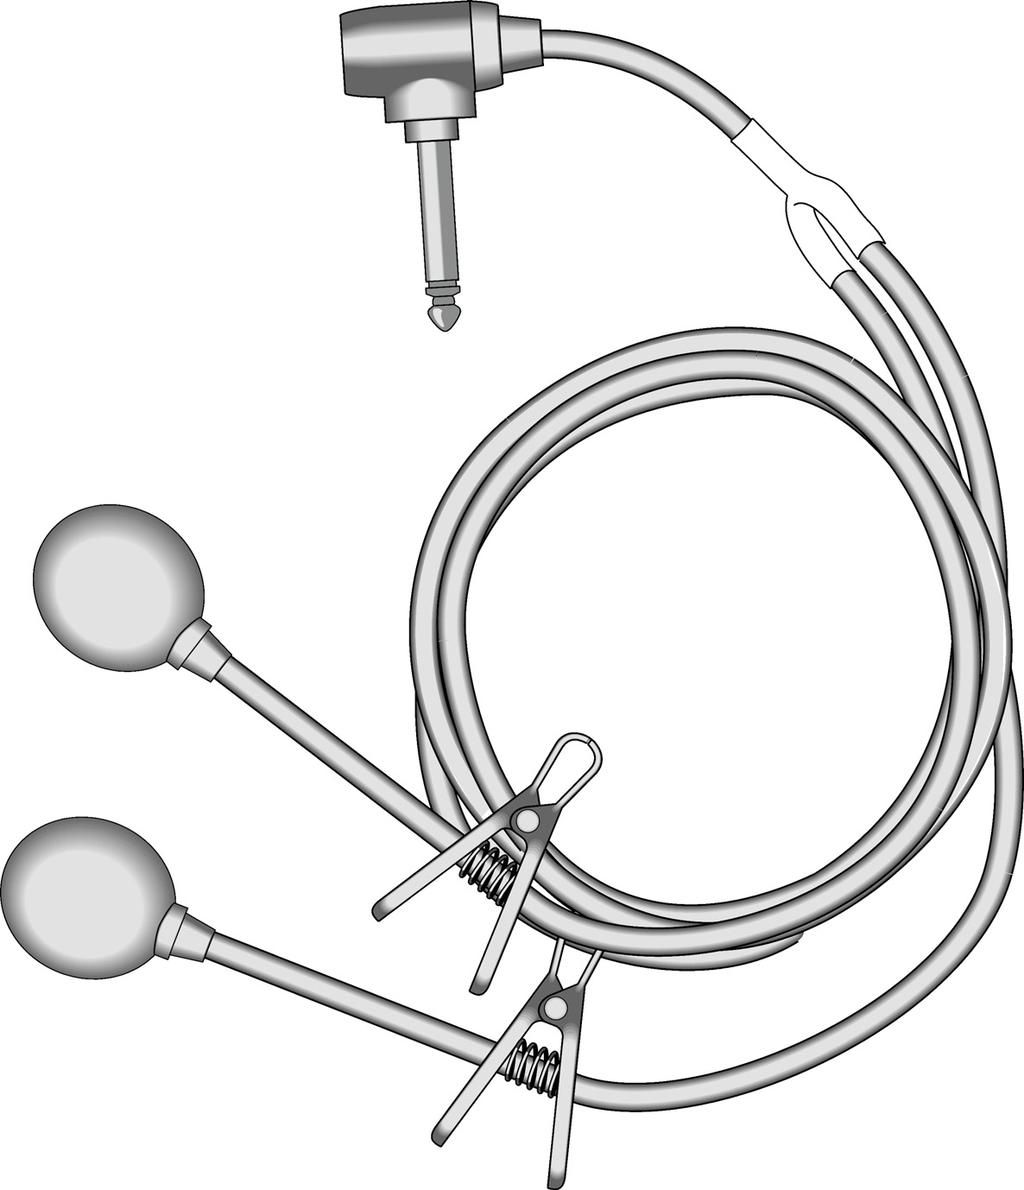 Chapter 4: Patient stations Figure 34: Dual air cord assemblies (Models 200-448 and 200-449) These air cord assemblies provide nurse call capabilities for two patients at one patient station.